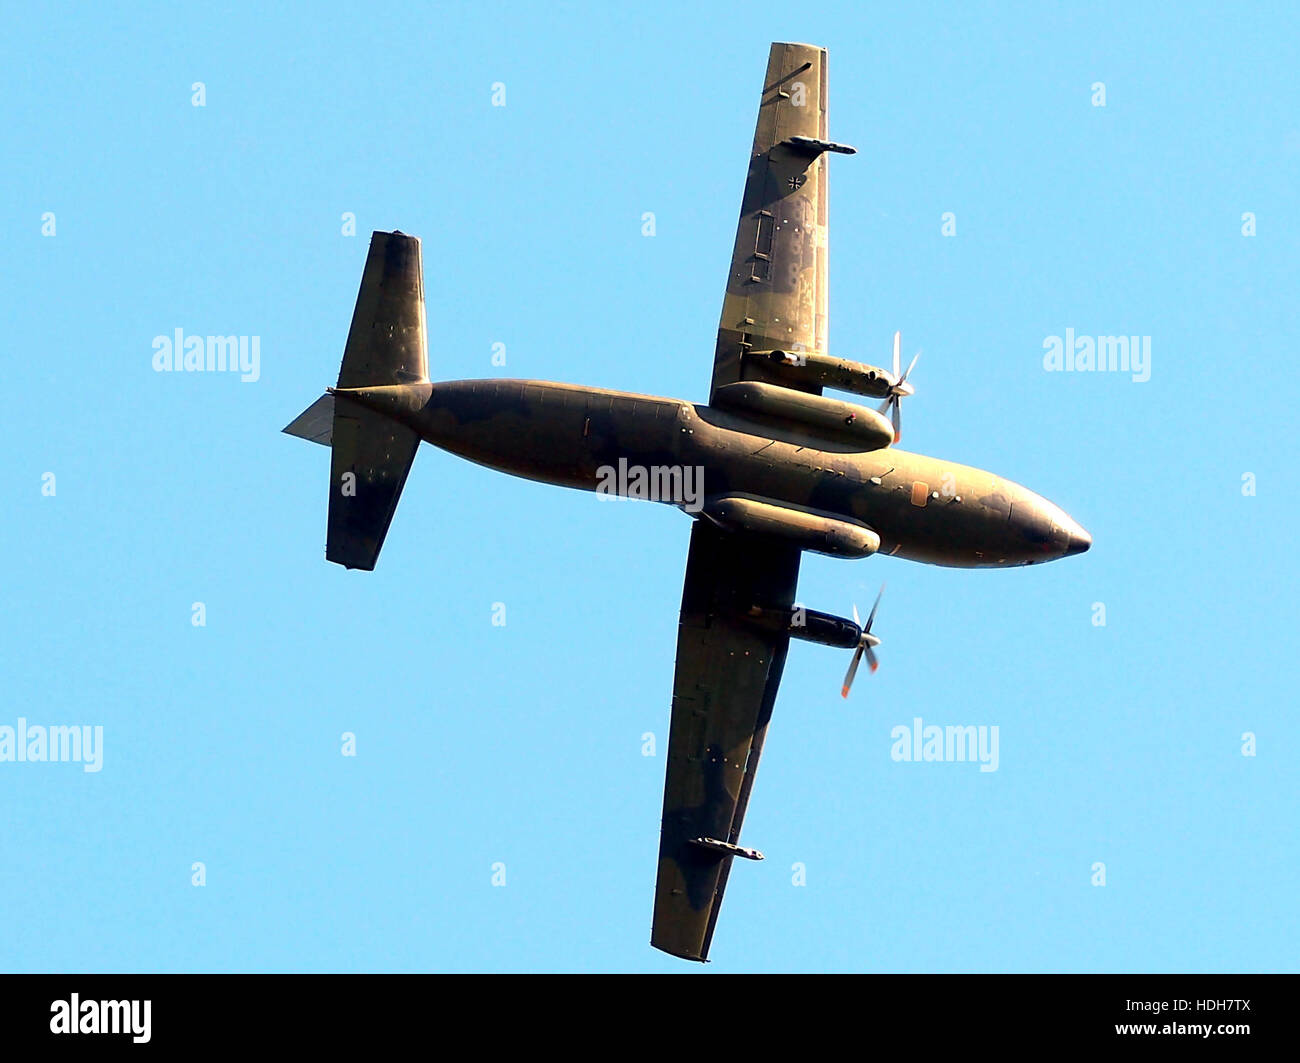 C-160 Transall over the Loreley pic4 Stock Photo